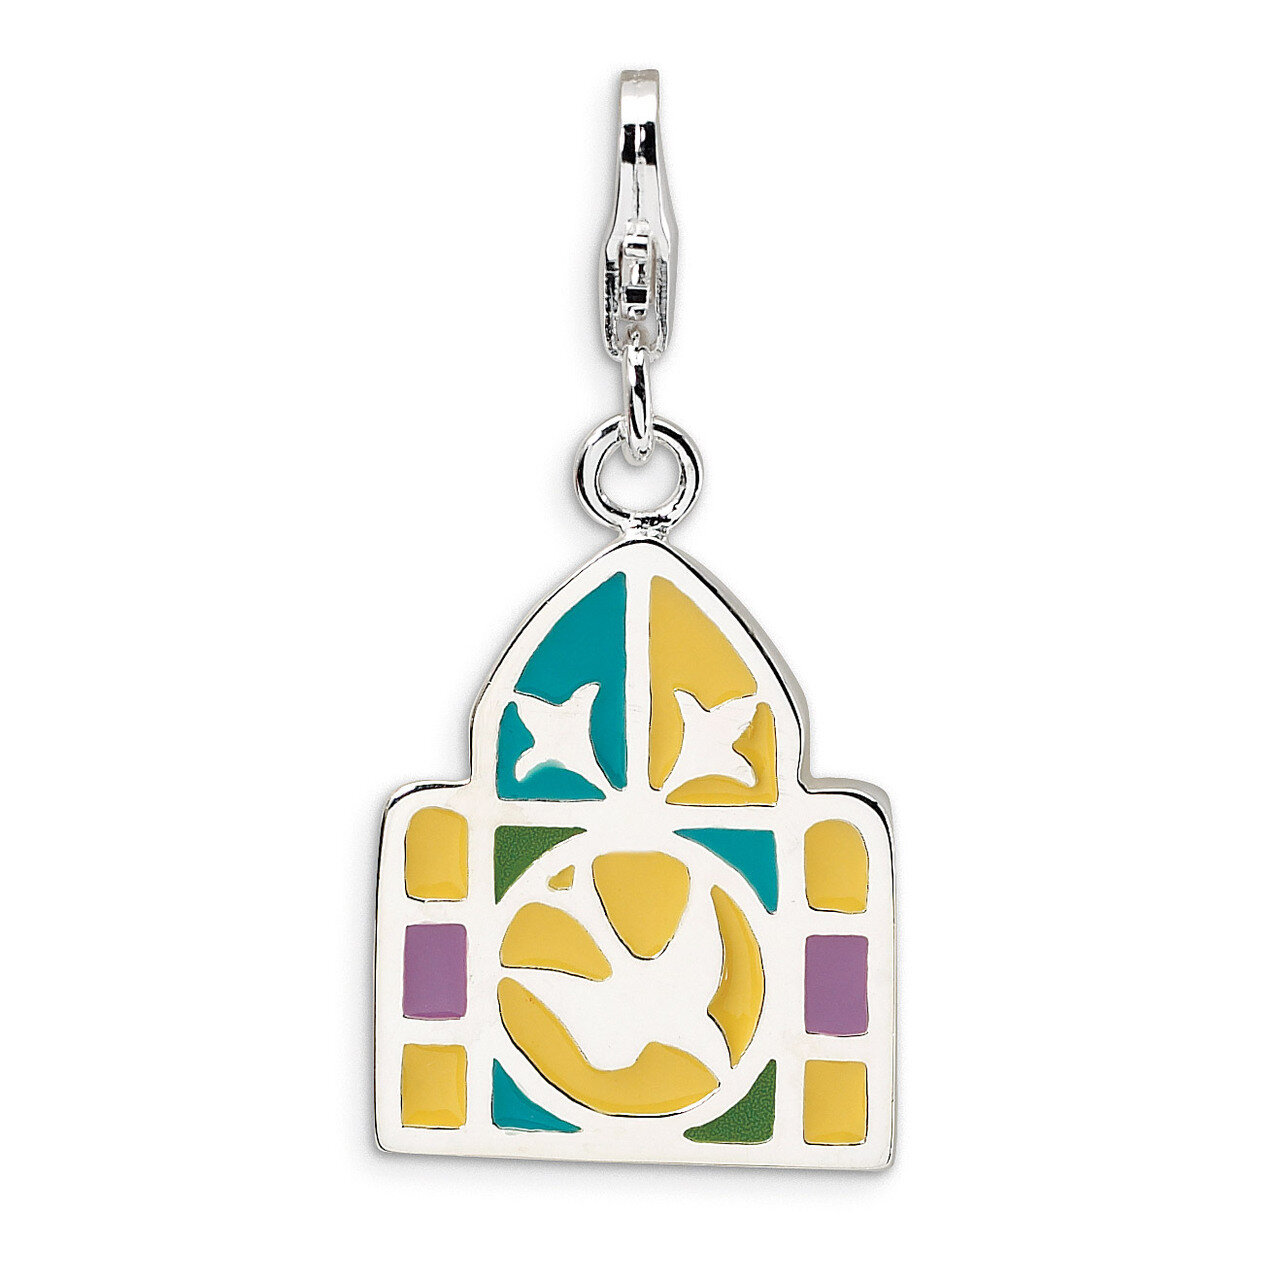 3-D Enameled Stain GlaWindow Charm Sterling Silver QCC520